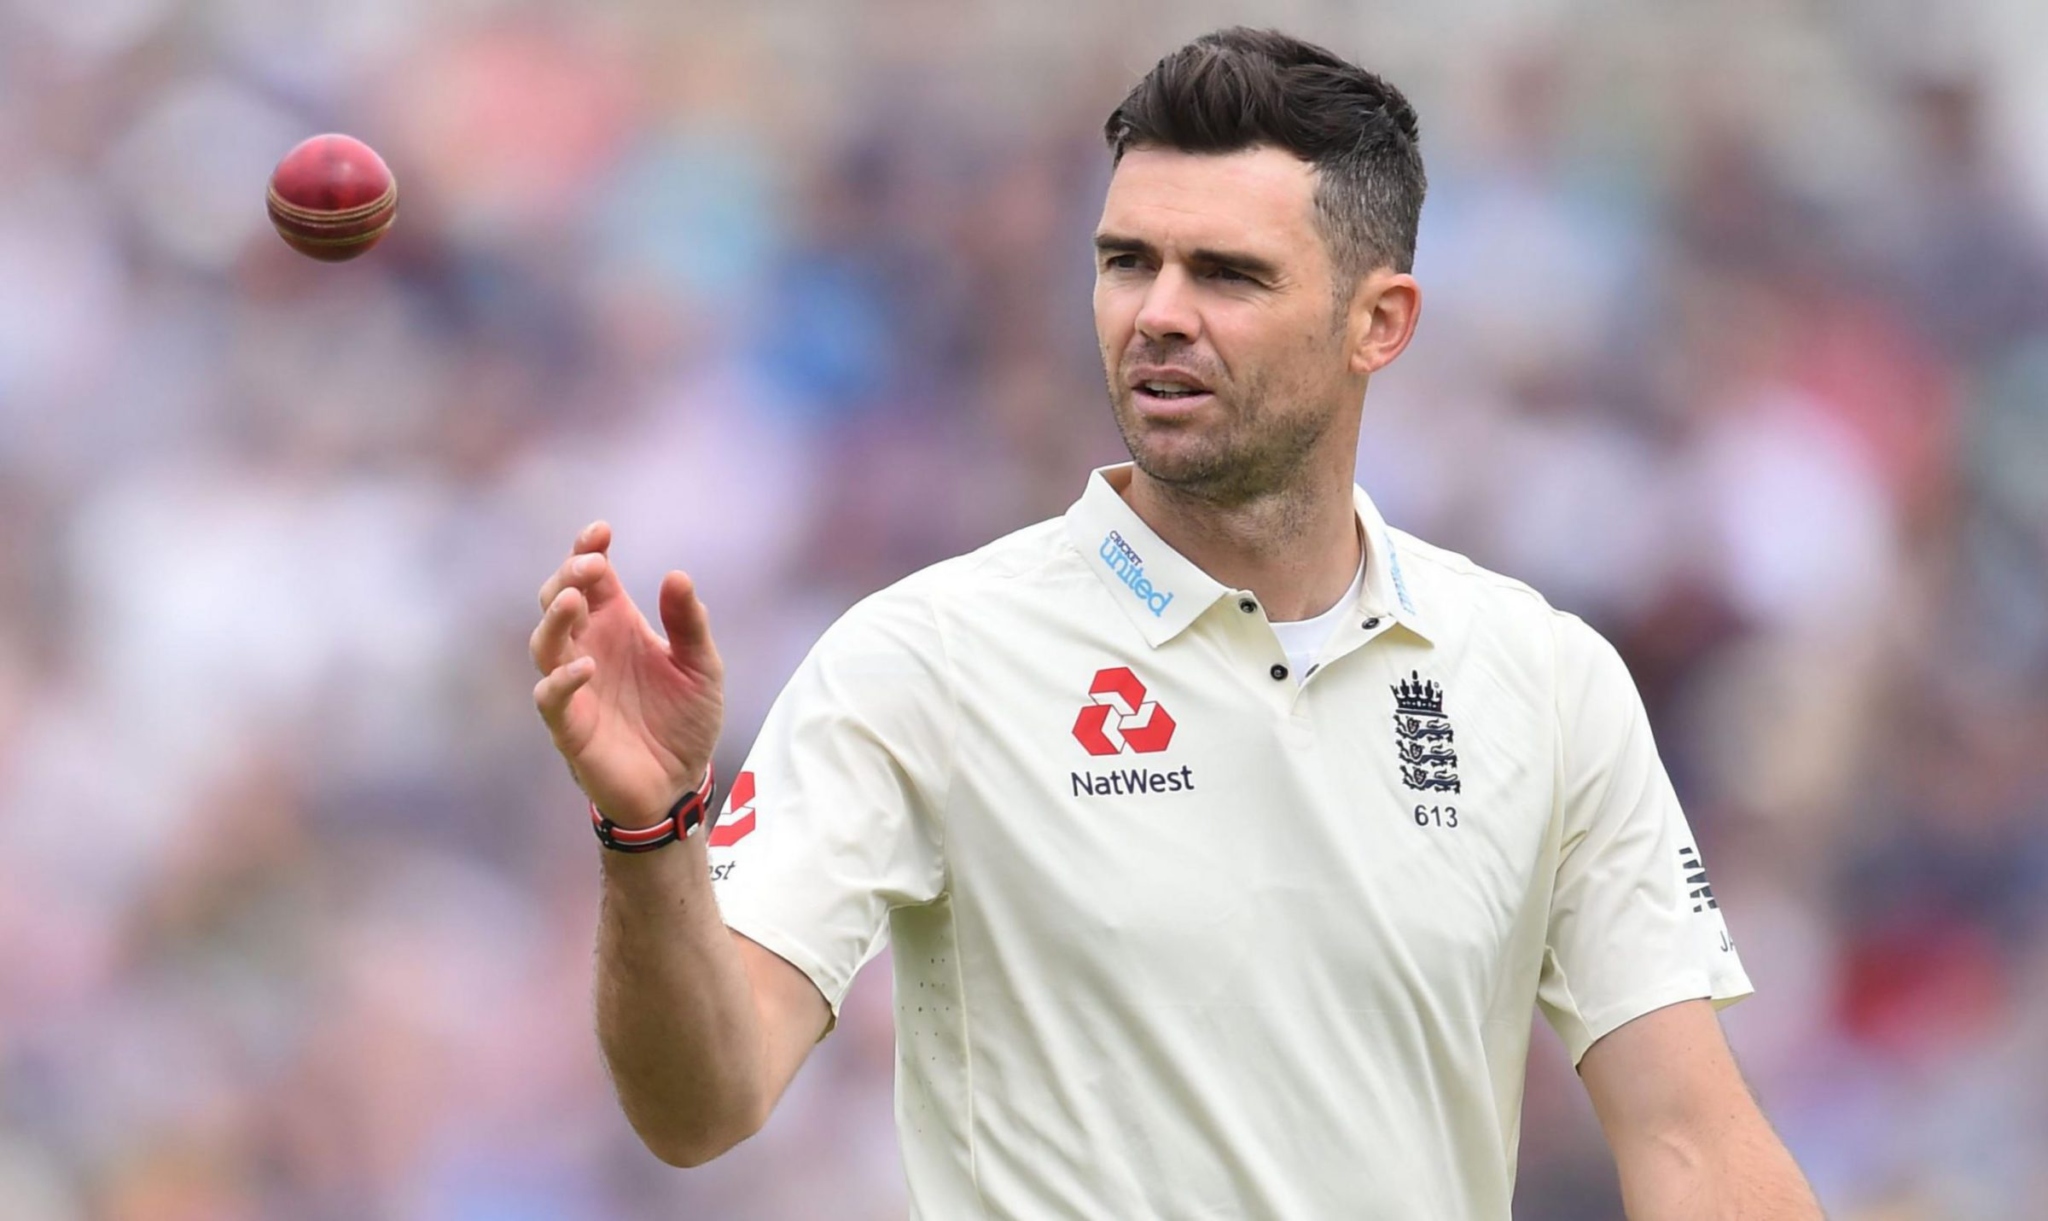 James Anderson diminishes retirement's rumors, wants to play at least